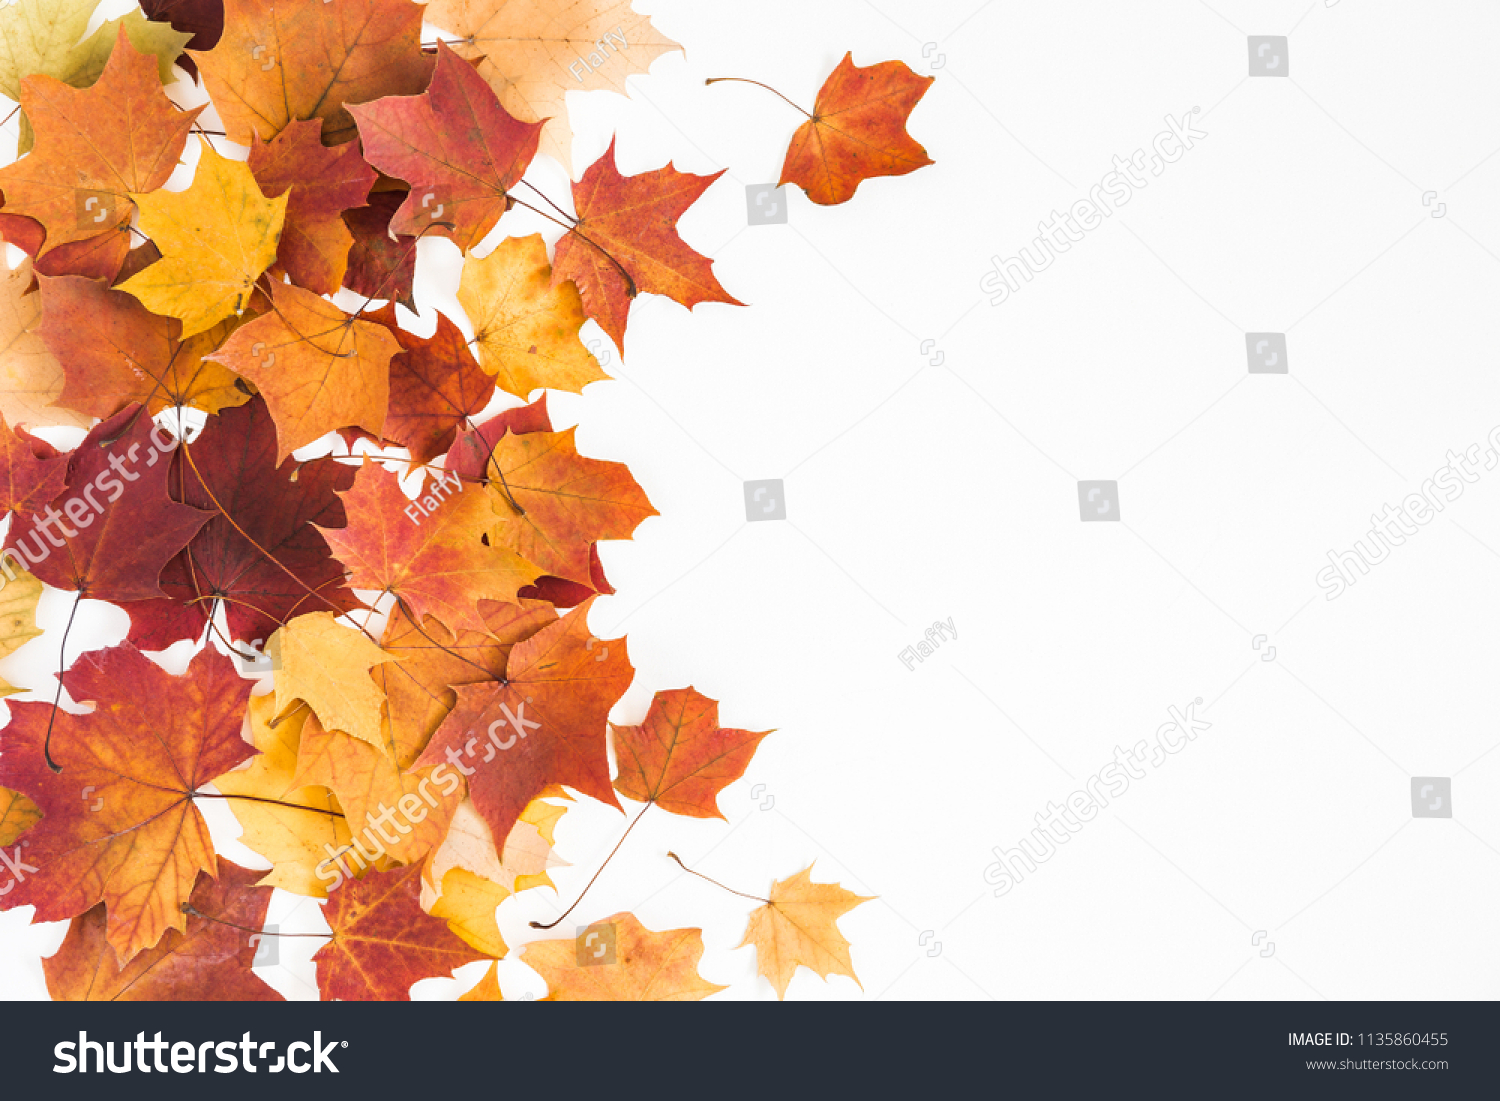 Autumn composition. Frame made of autumn dried leaves on white background. Flat lay, top view, copy space #1135860455